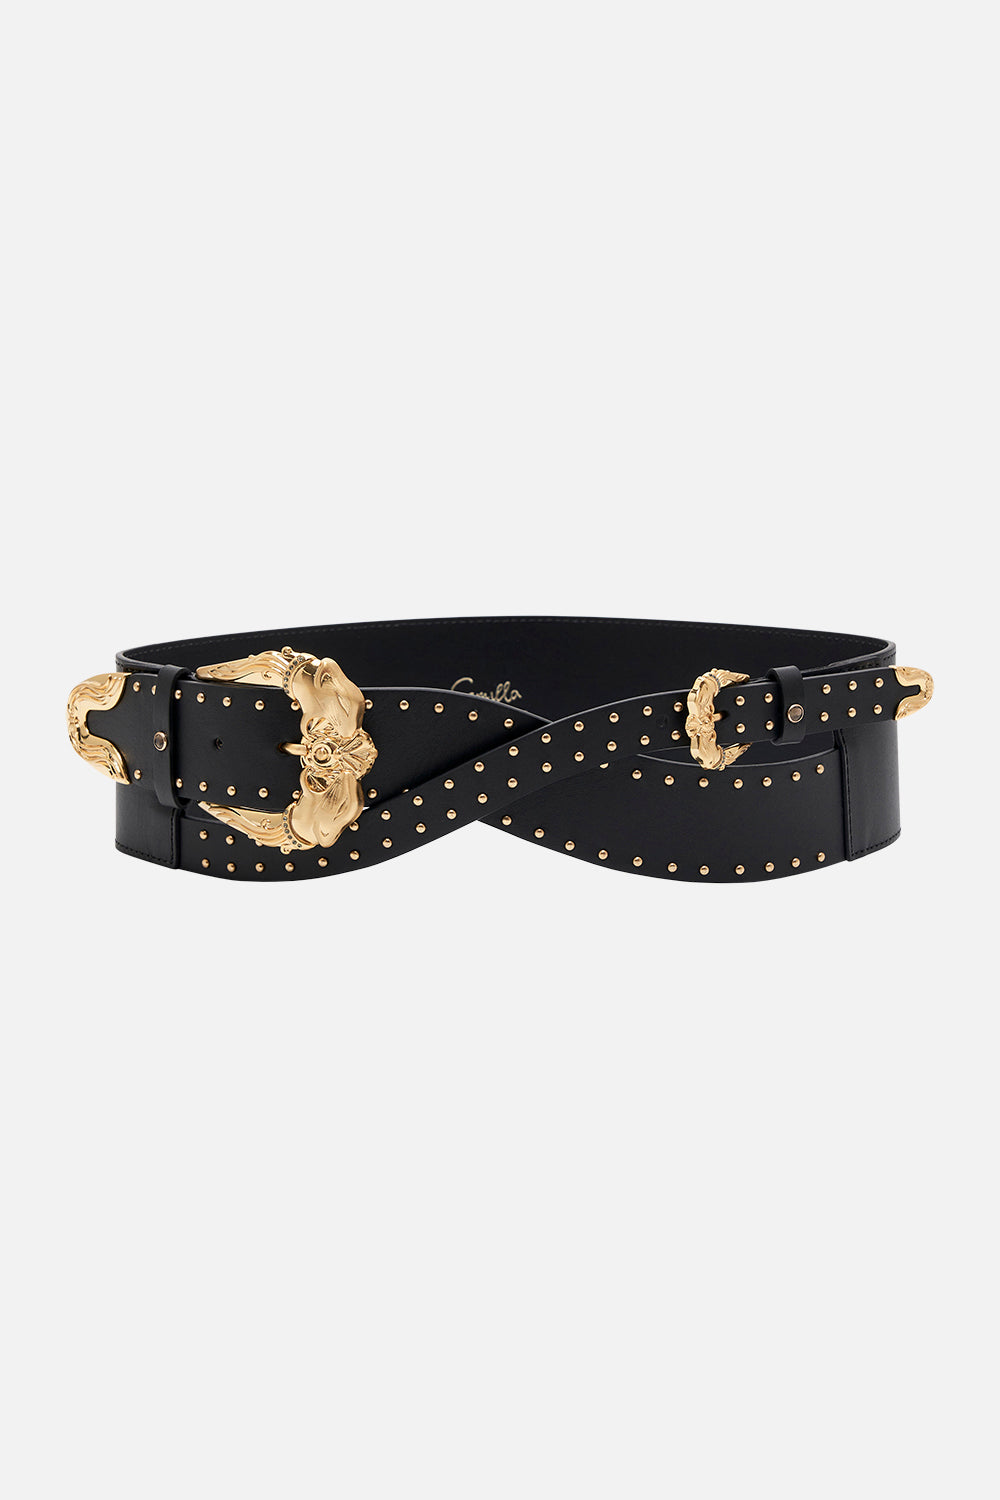 Studded Buckle Belt Solid Black print by CAMILLA